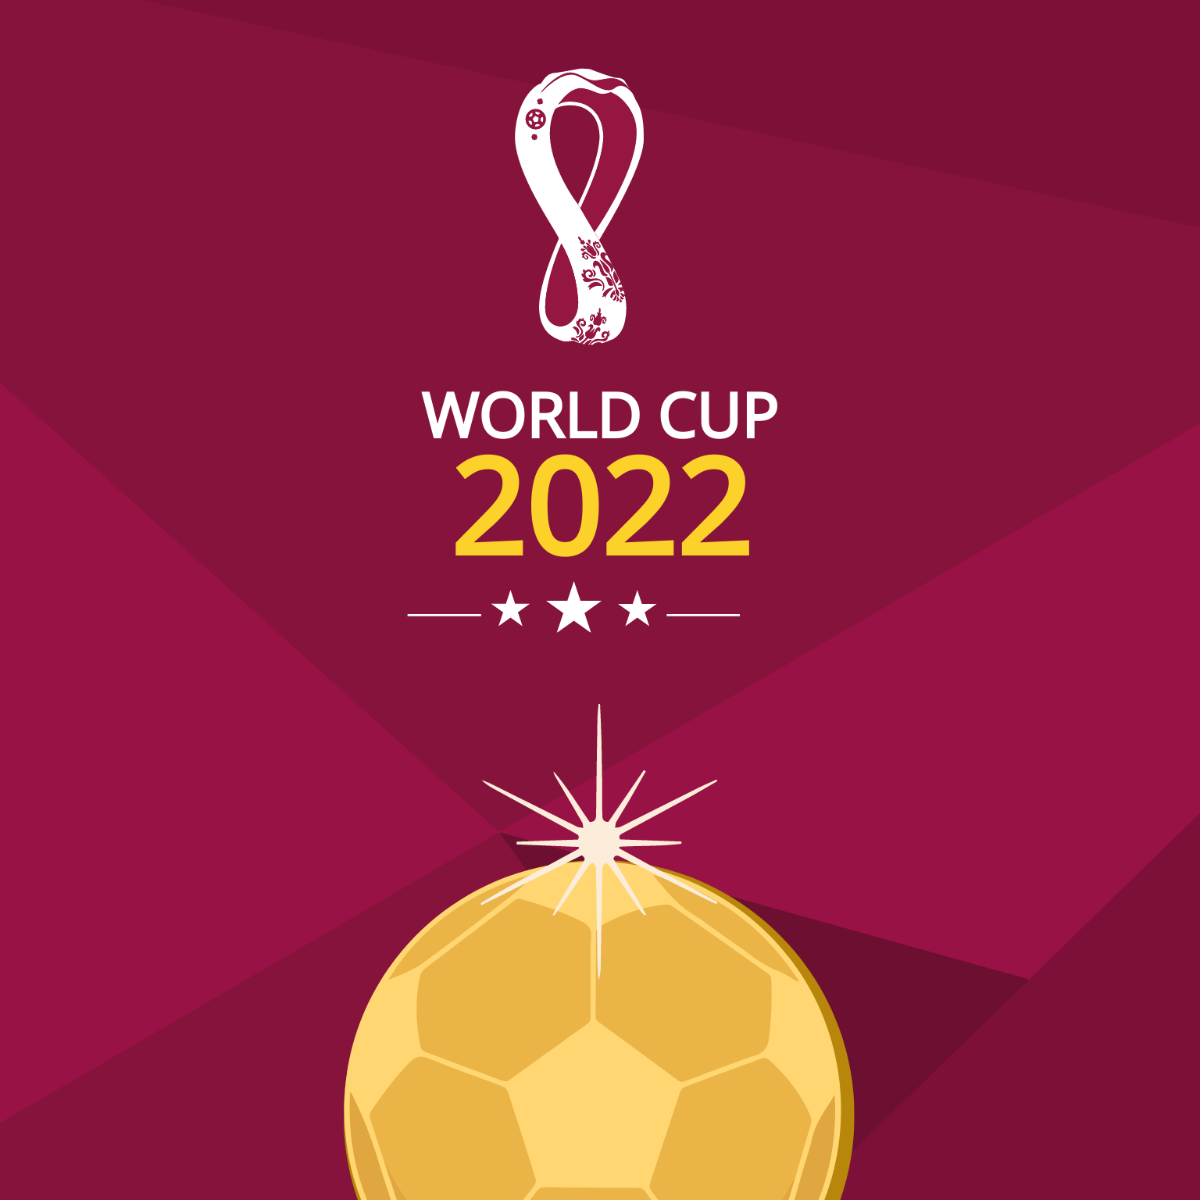 World Cup 2022 Design Vector Template